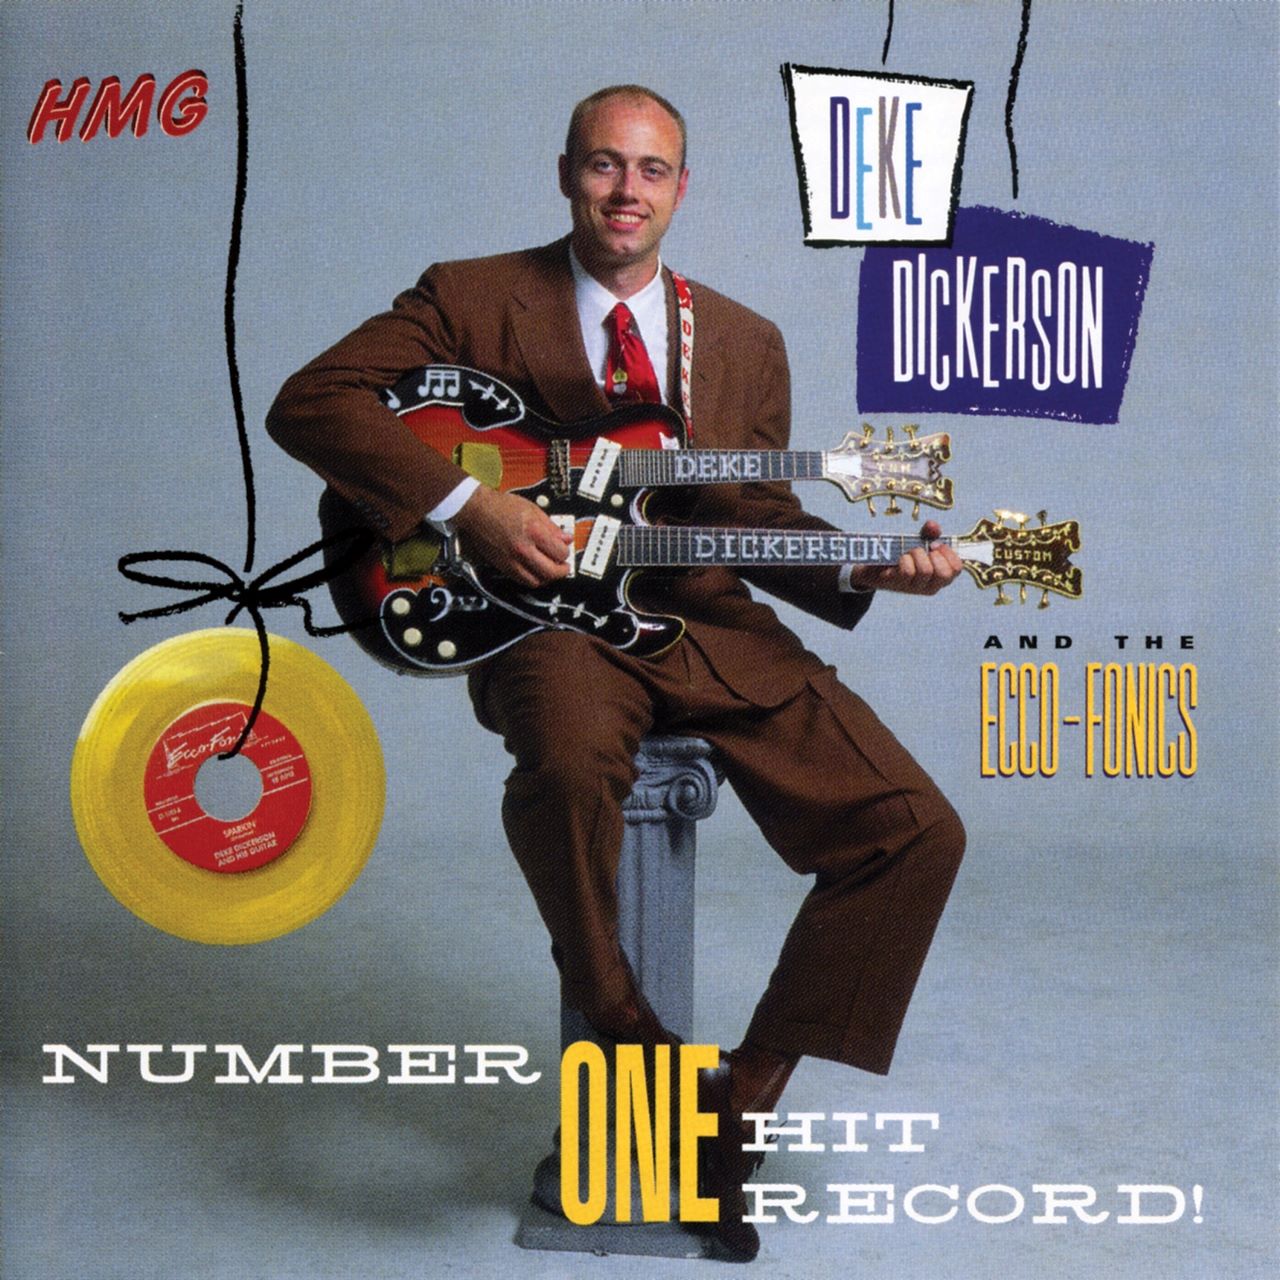 Deke Dickerson & The Ecco-Fonics - Number One Hit Record! cover album